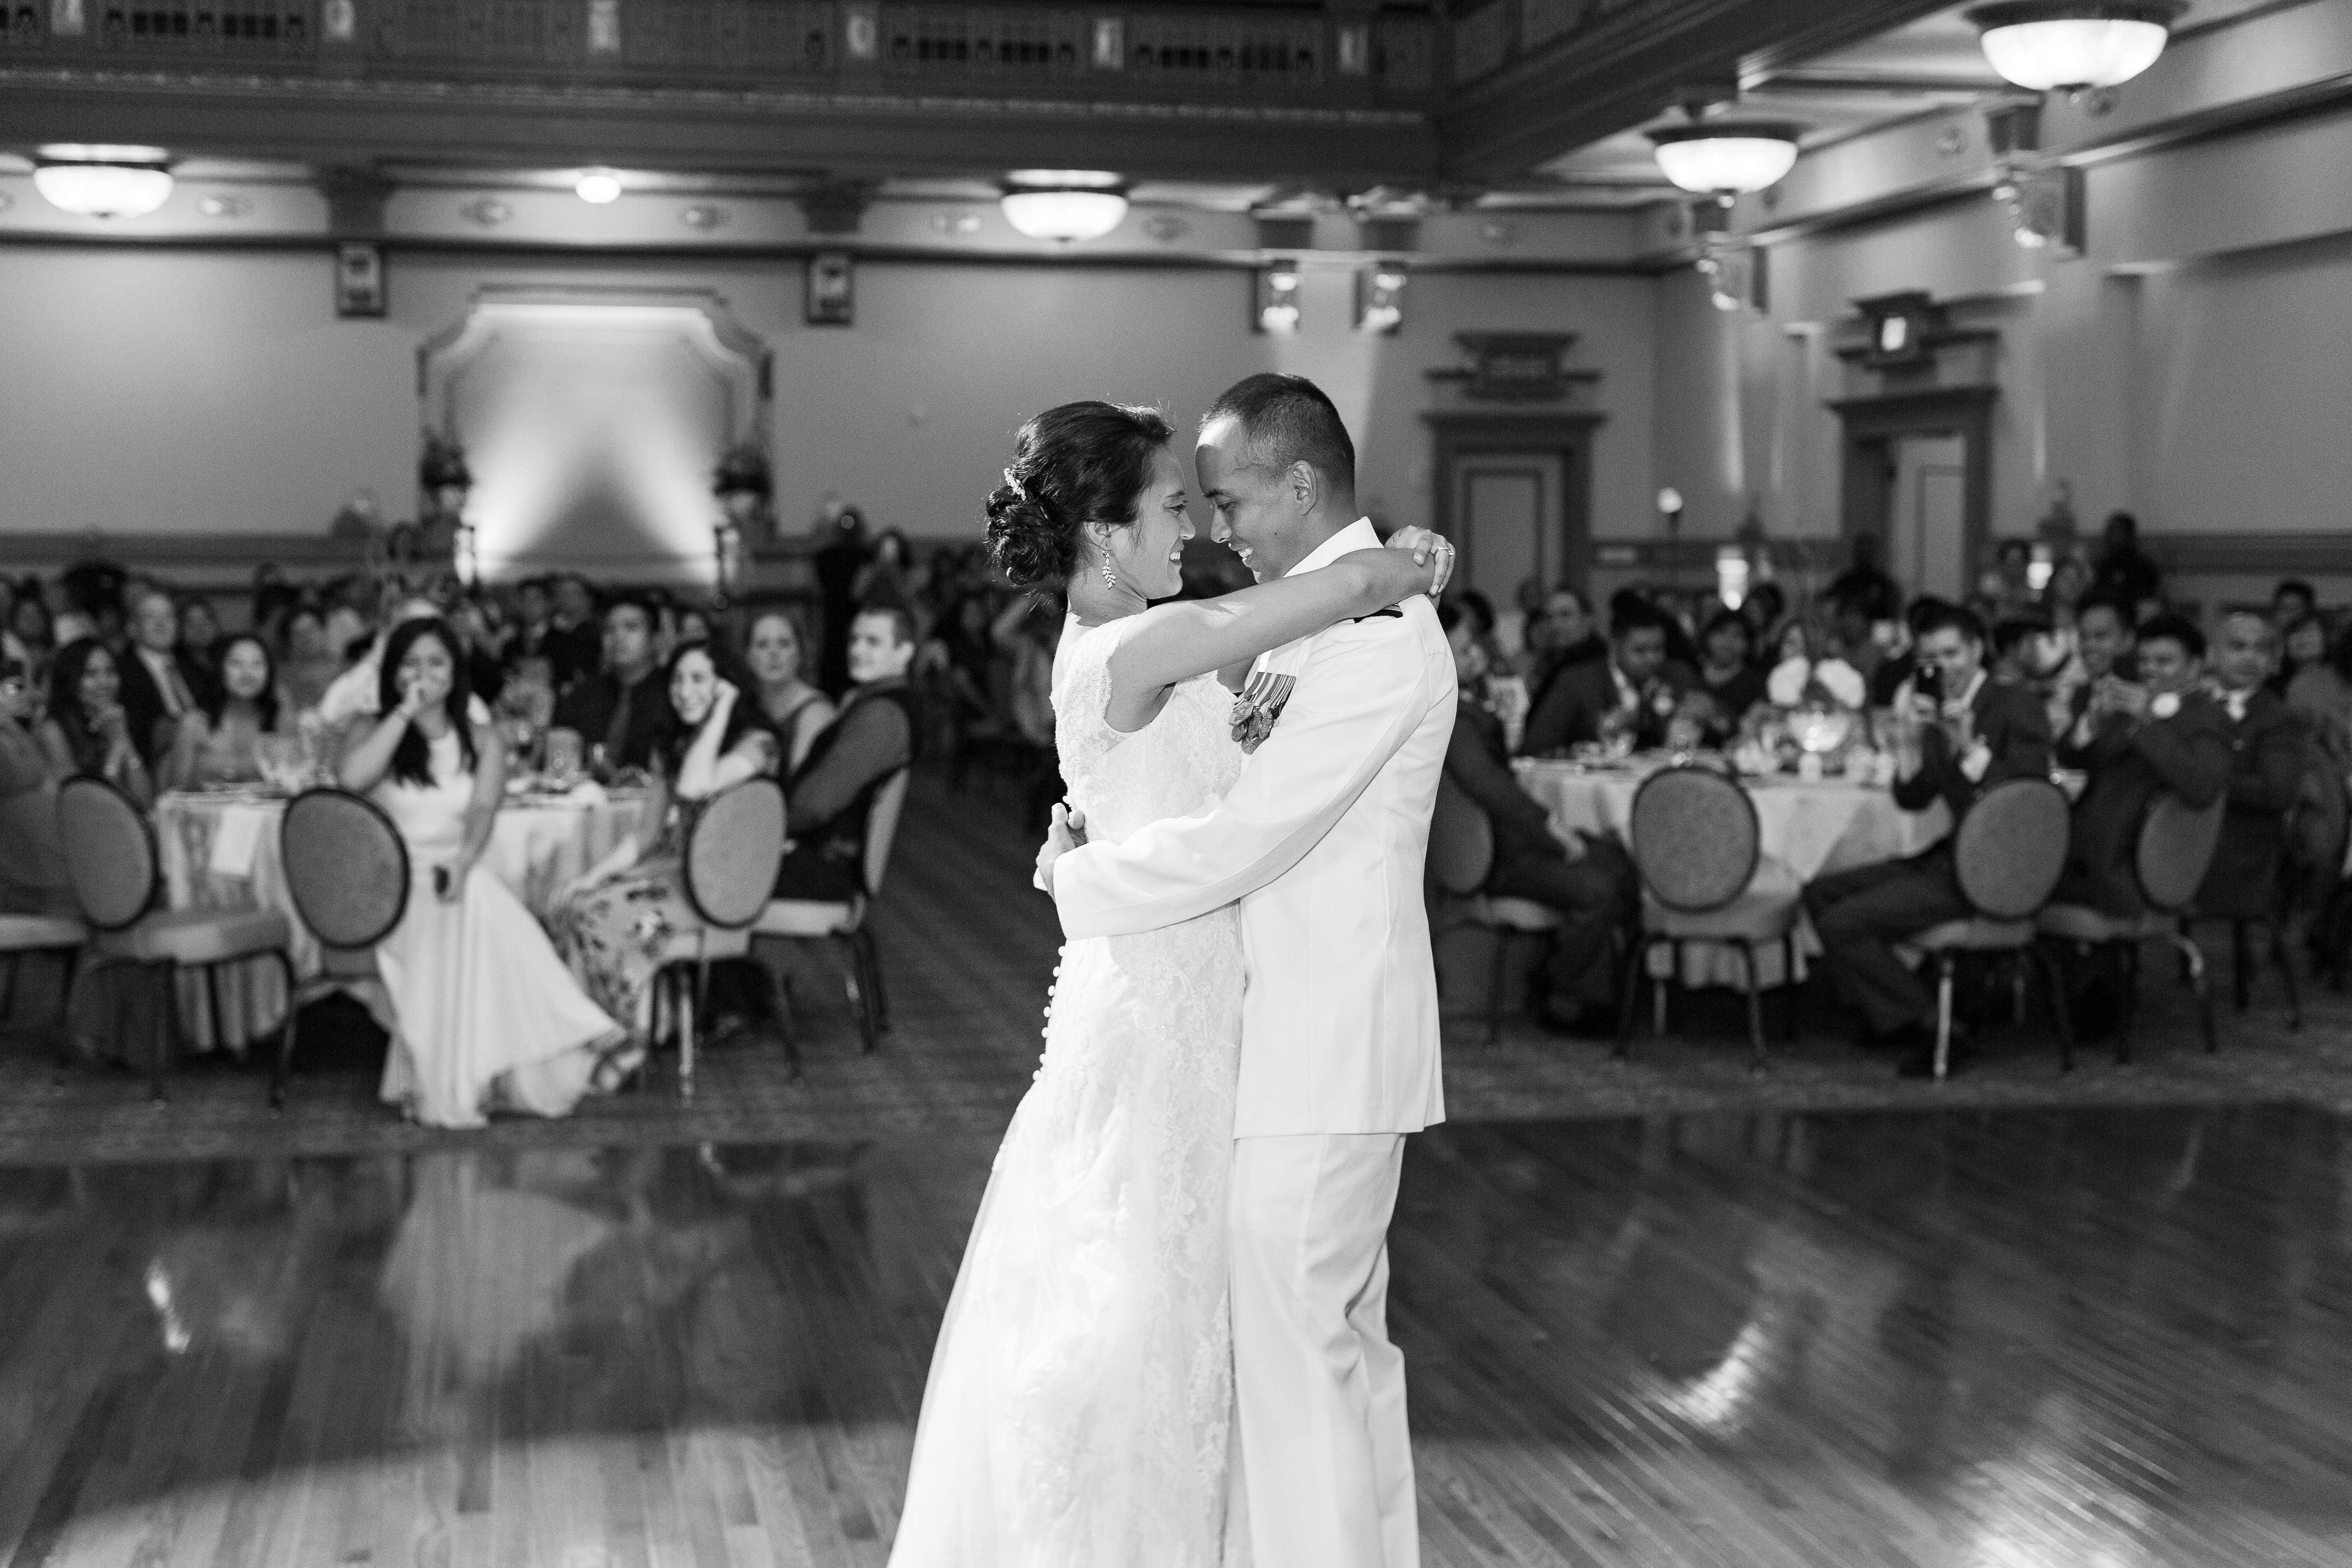 Reception at the john marshall ballroom with bride and groom first dance